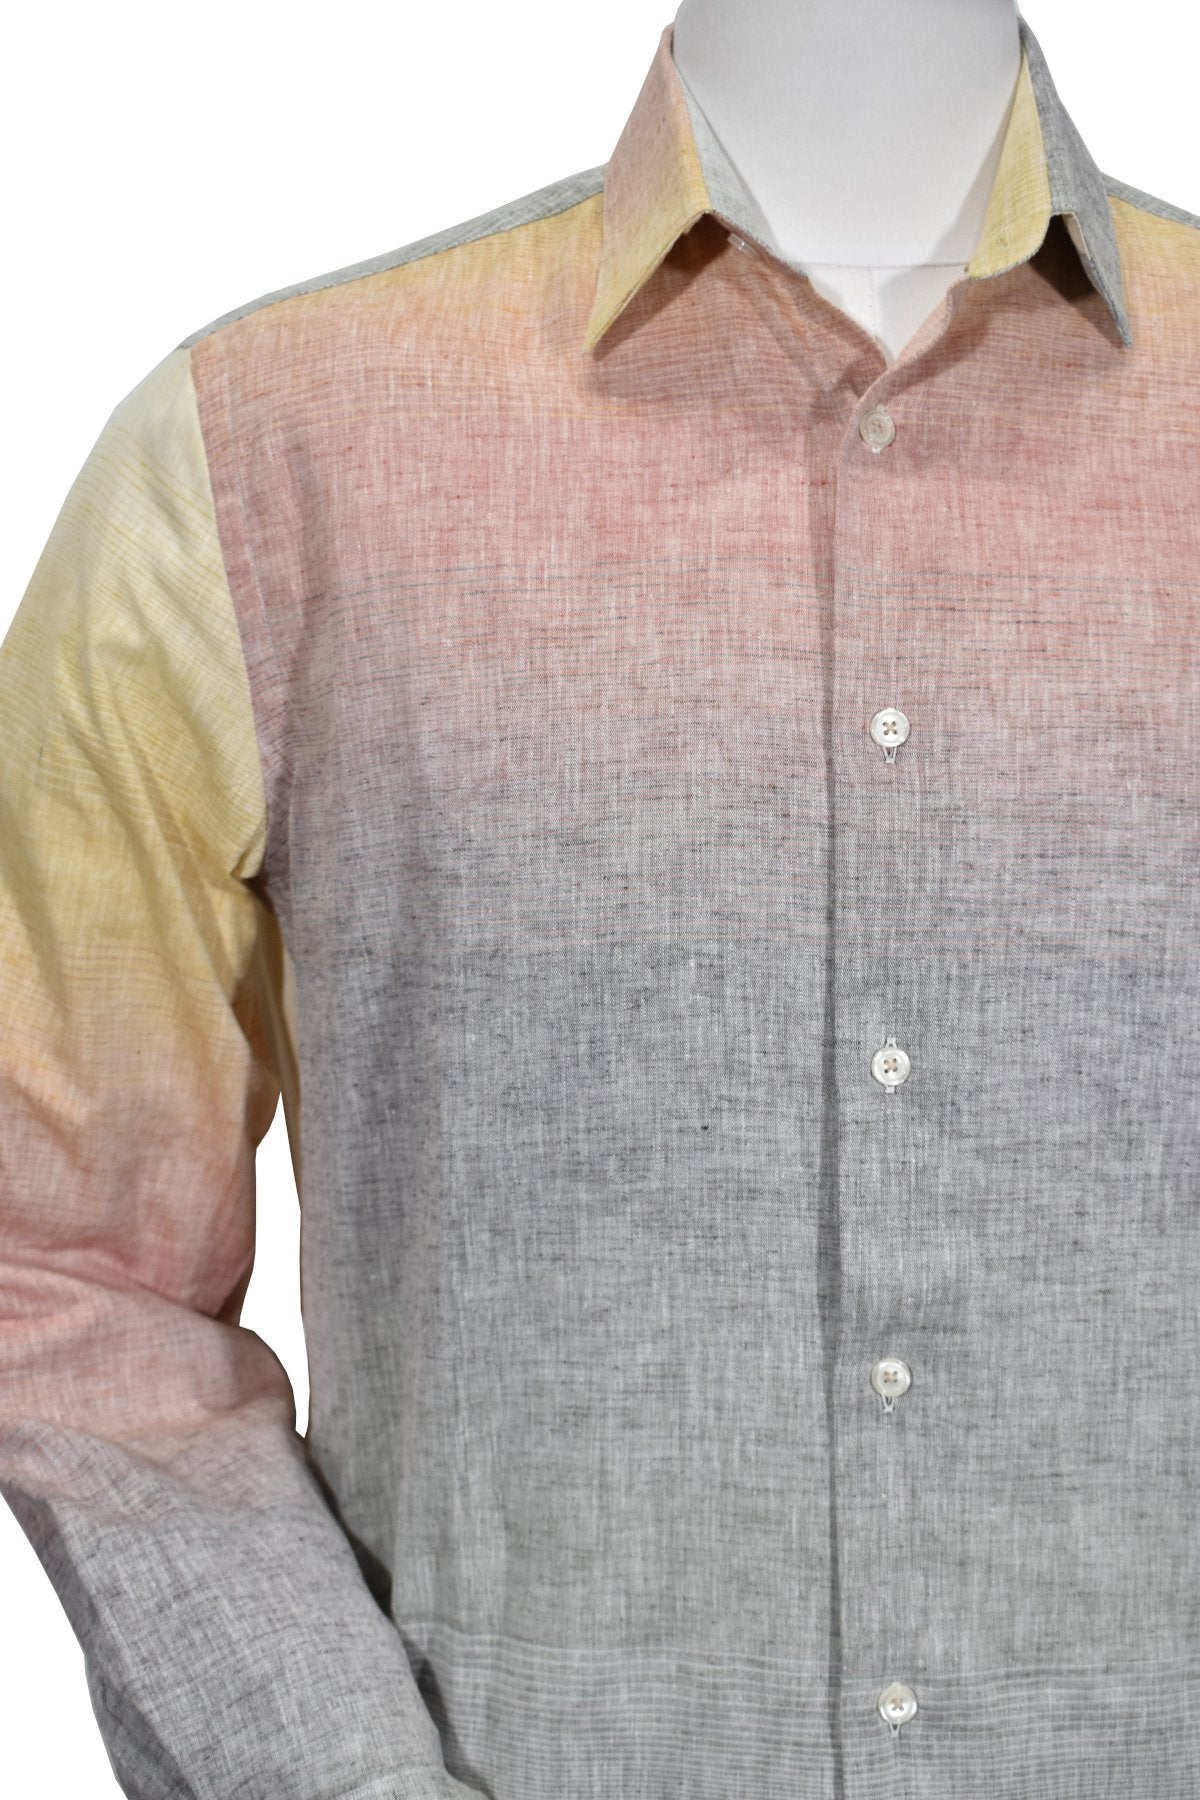 This light Coral linen shirt is the perfect way to add a unique touch to any wardrobe! Its hombre effect mixes cool colors that you can easily style with any outfit. Keep cool and look great in ZA11064 Coral Linen Shade! by Marcello Sport.